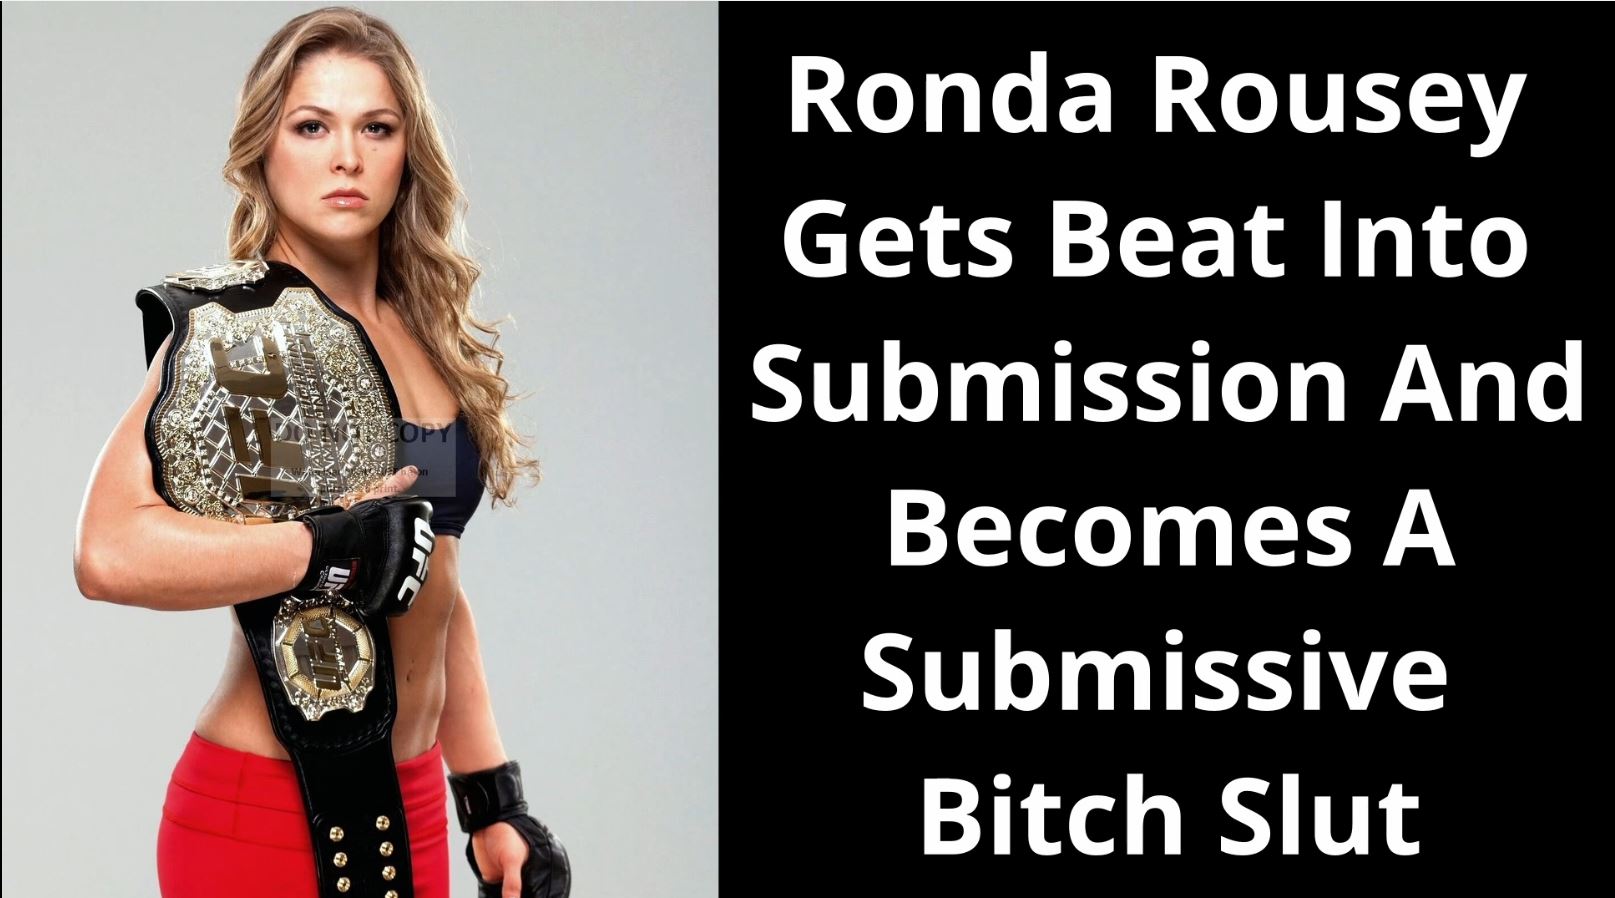 Best of Ronda rousey porn trailer